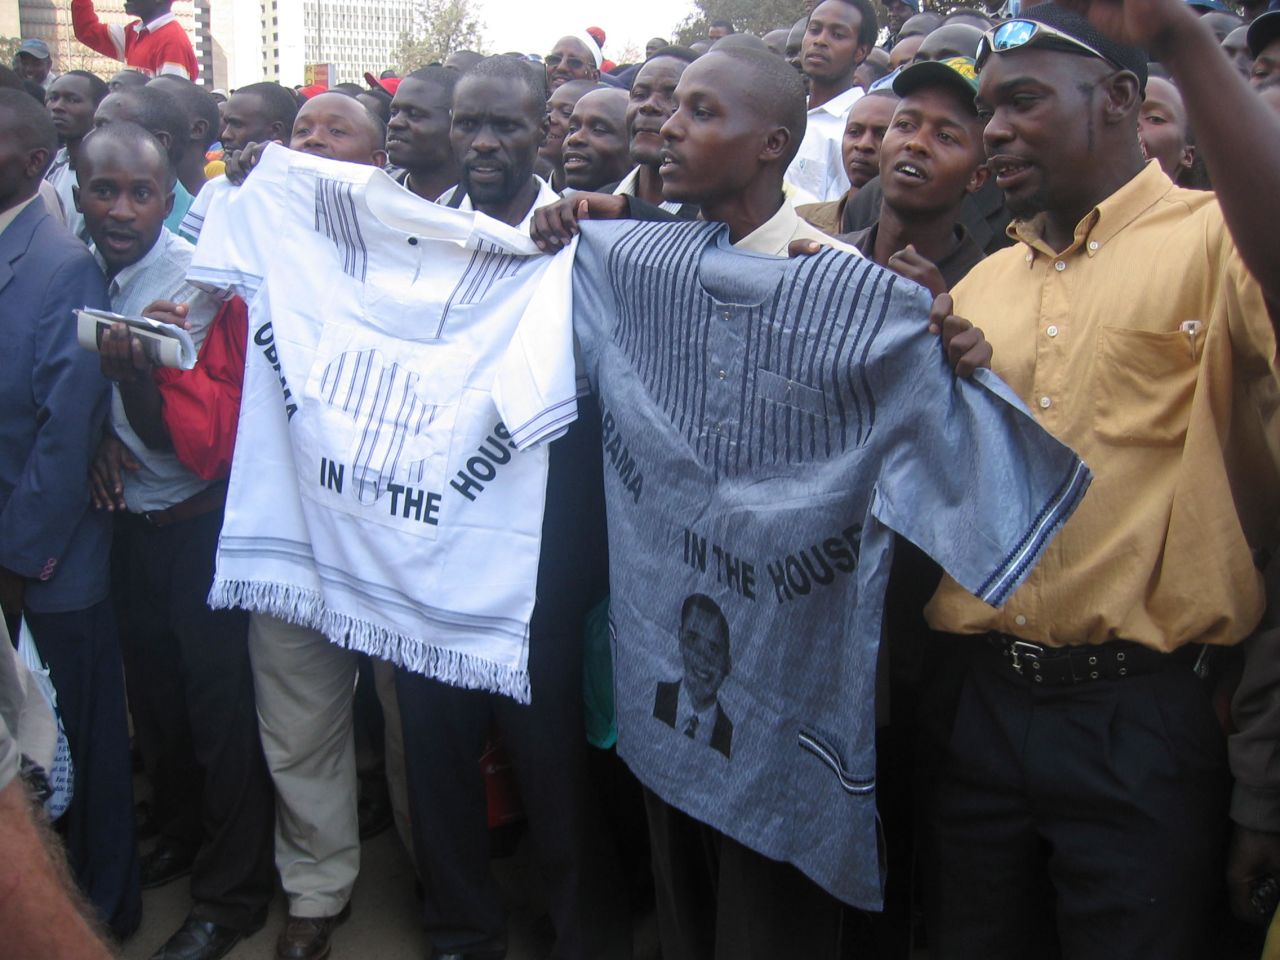 The Obama brand was popular across Africa, too, with these admirers holding up shirts as they watched Obama pass.